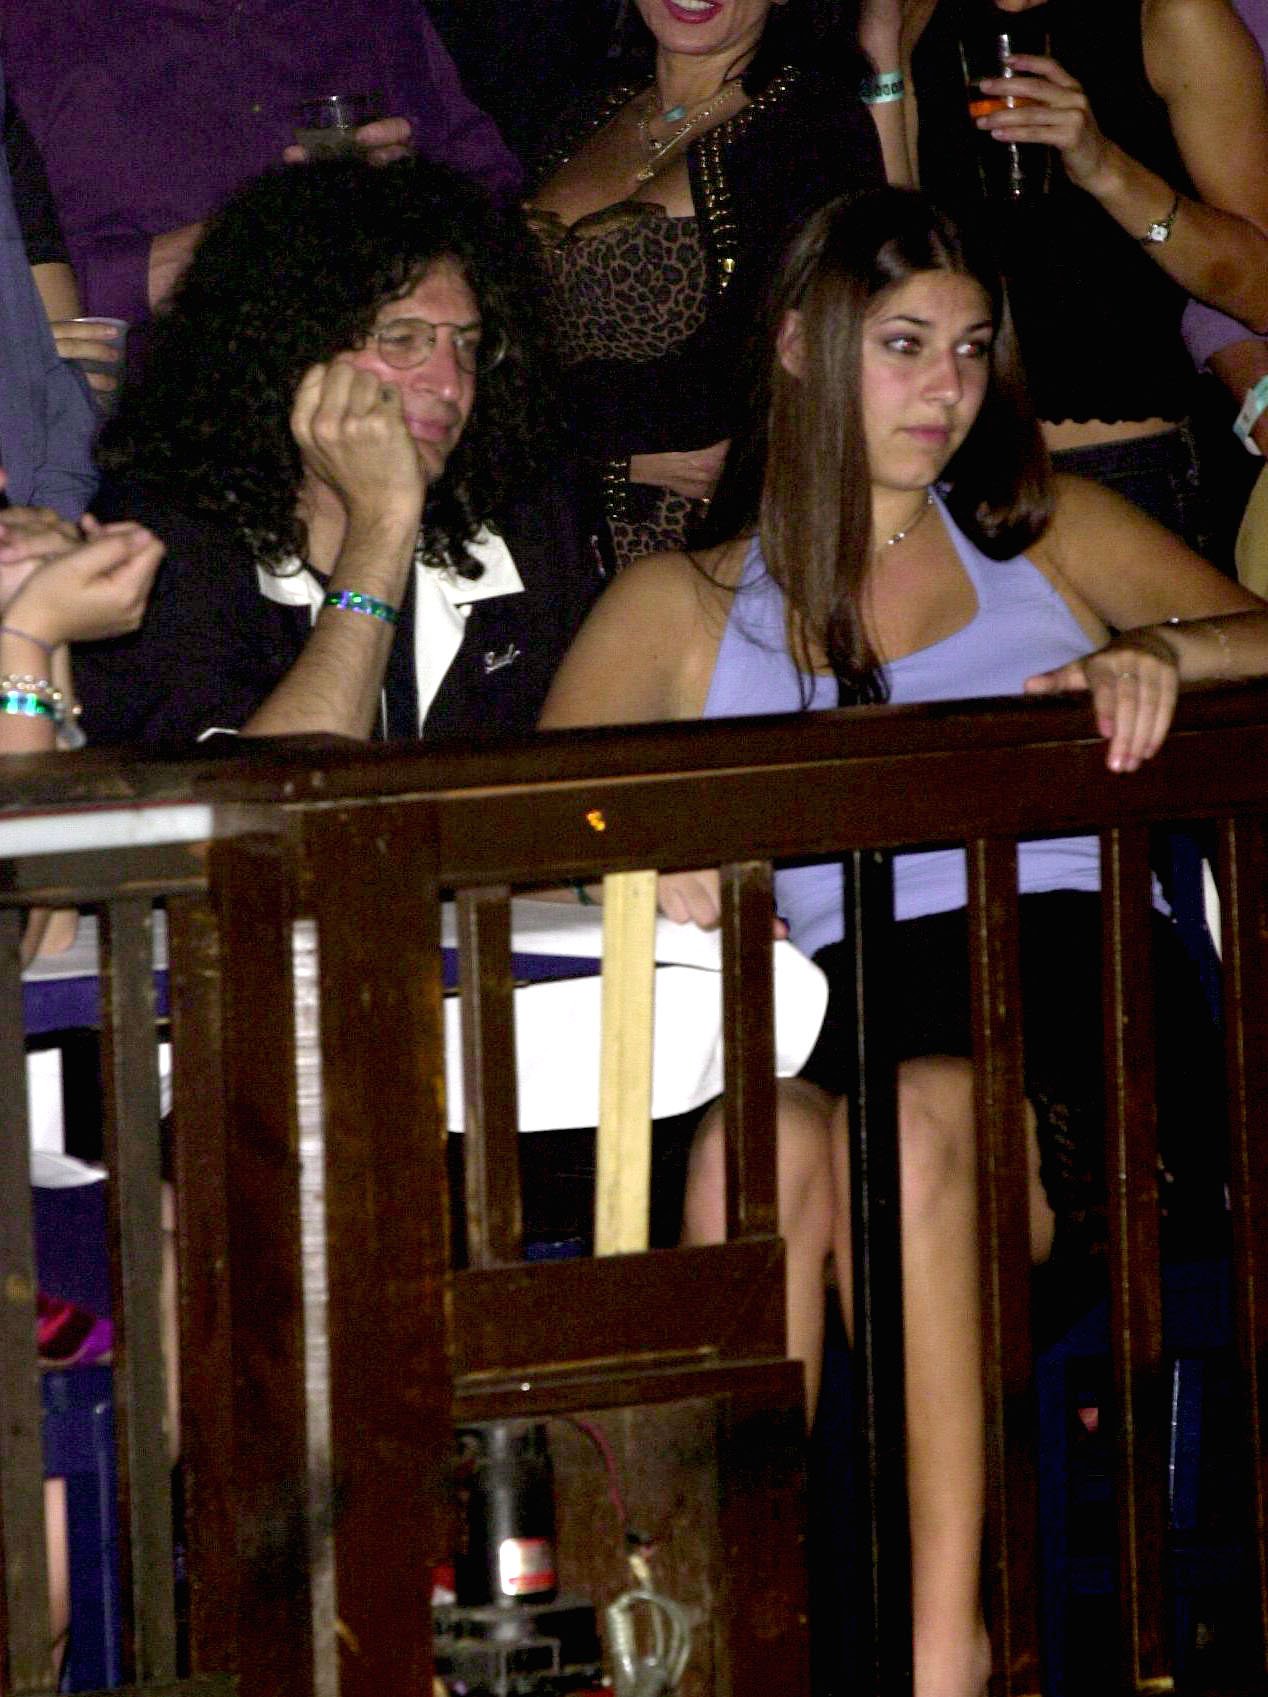 Howard Stern is photographed with his daughter at the "Sugar Ray" concert at the House of Blues on April 25, 2000, in Los Angeles | Source: Getty Images